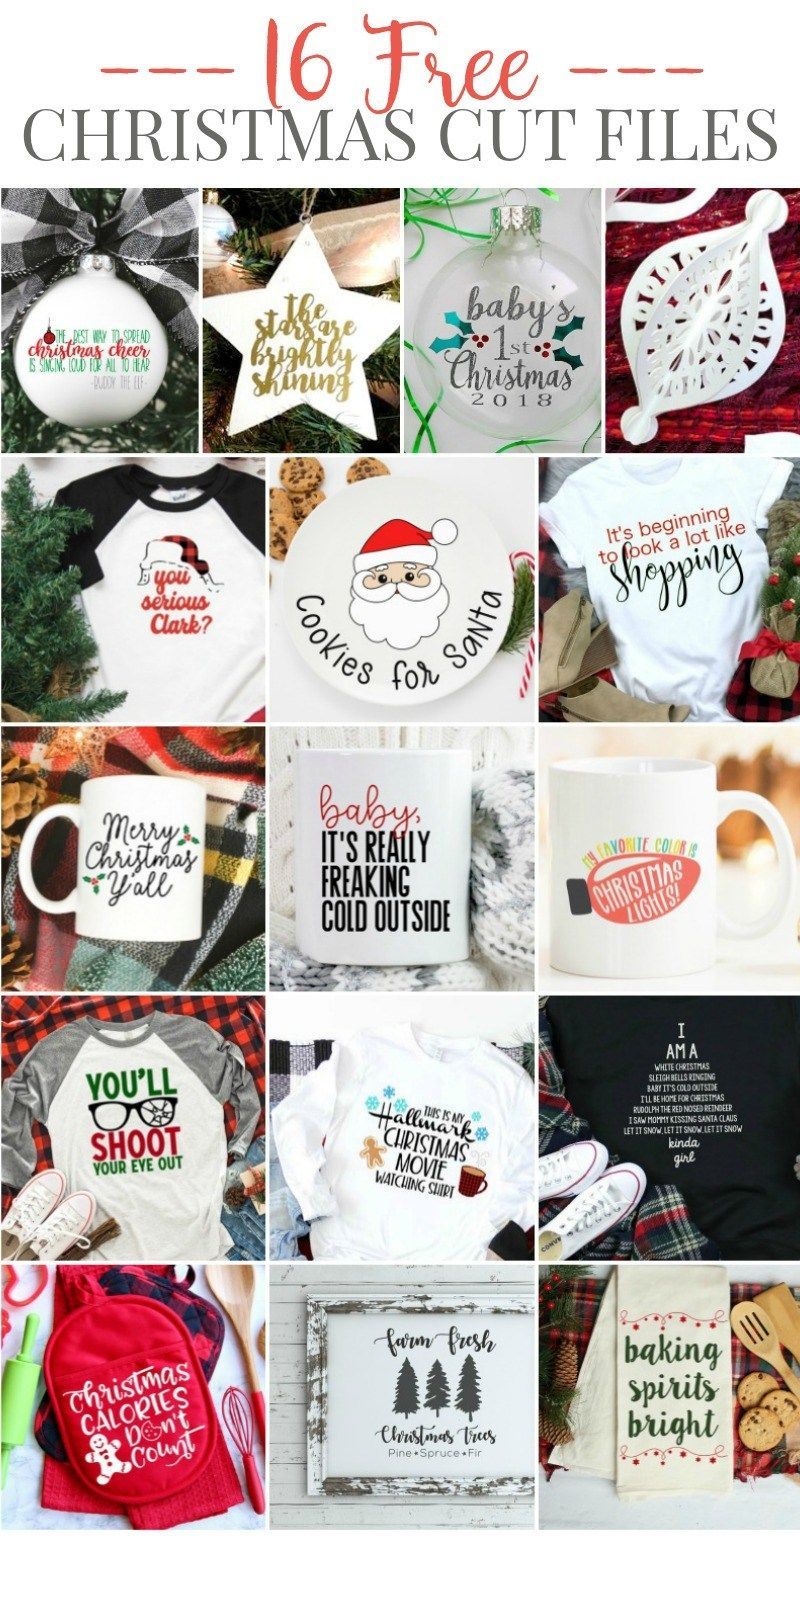 Free Christmas SVG You Serious Clark? - Everyday Party Magazine -   16 holiday Crafts cricut ideas